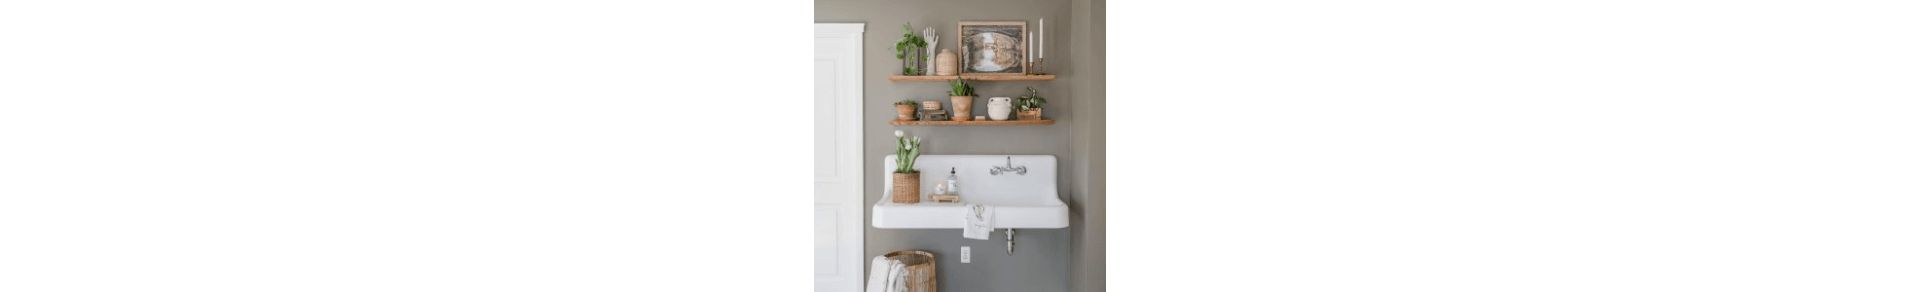 A bathroom sink mounted to a wall painted beige with two open shelves above with various green plants and neutral accents.